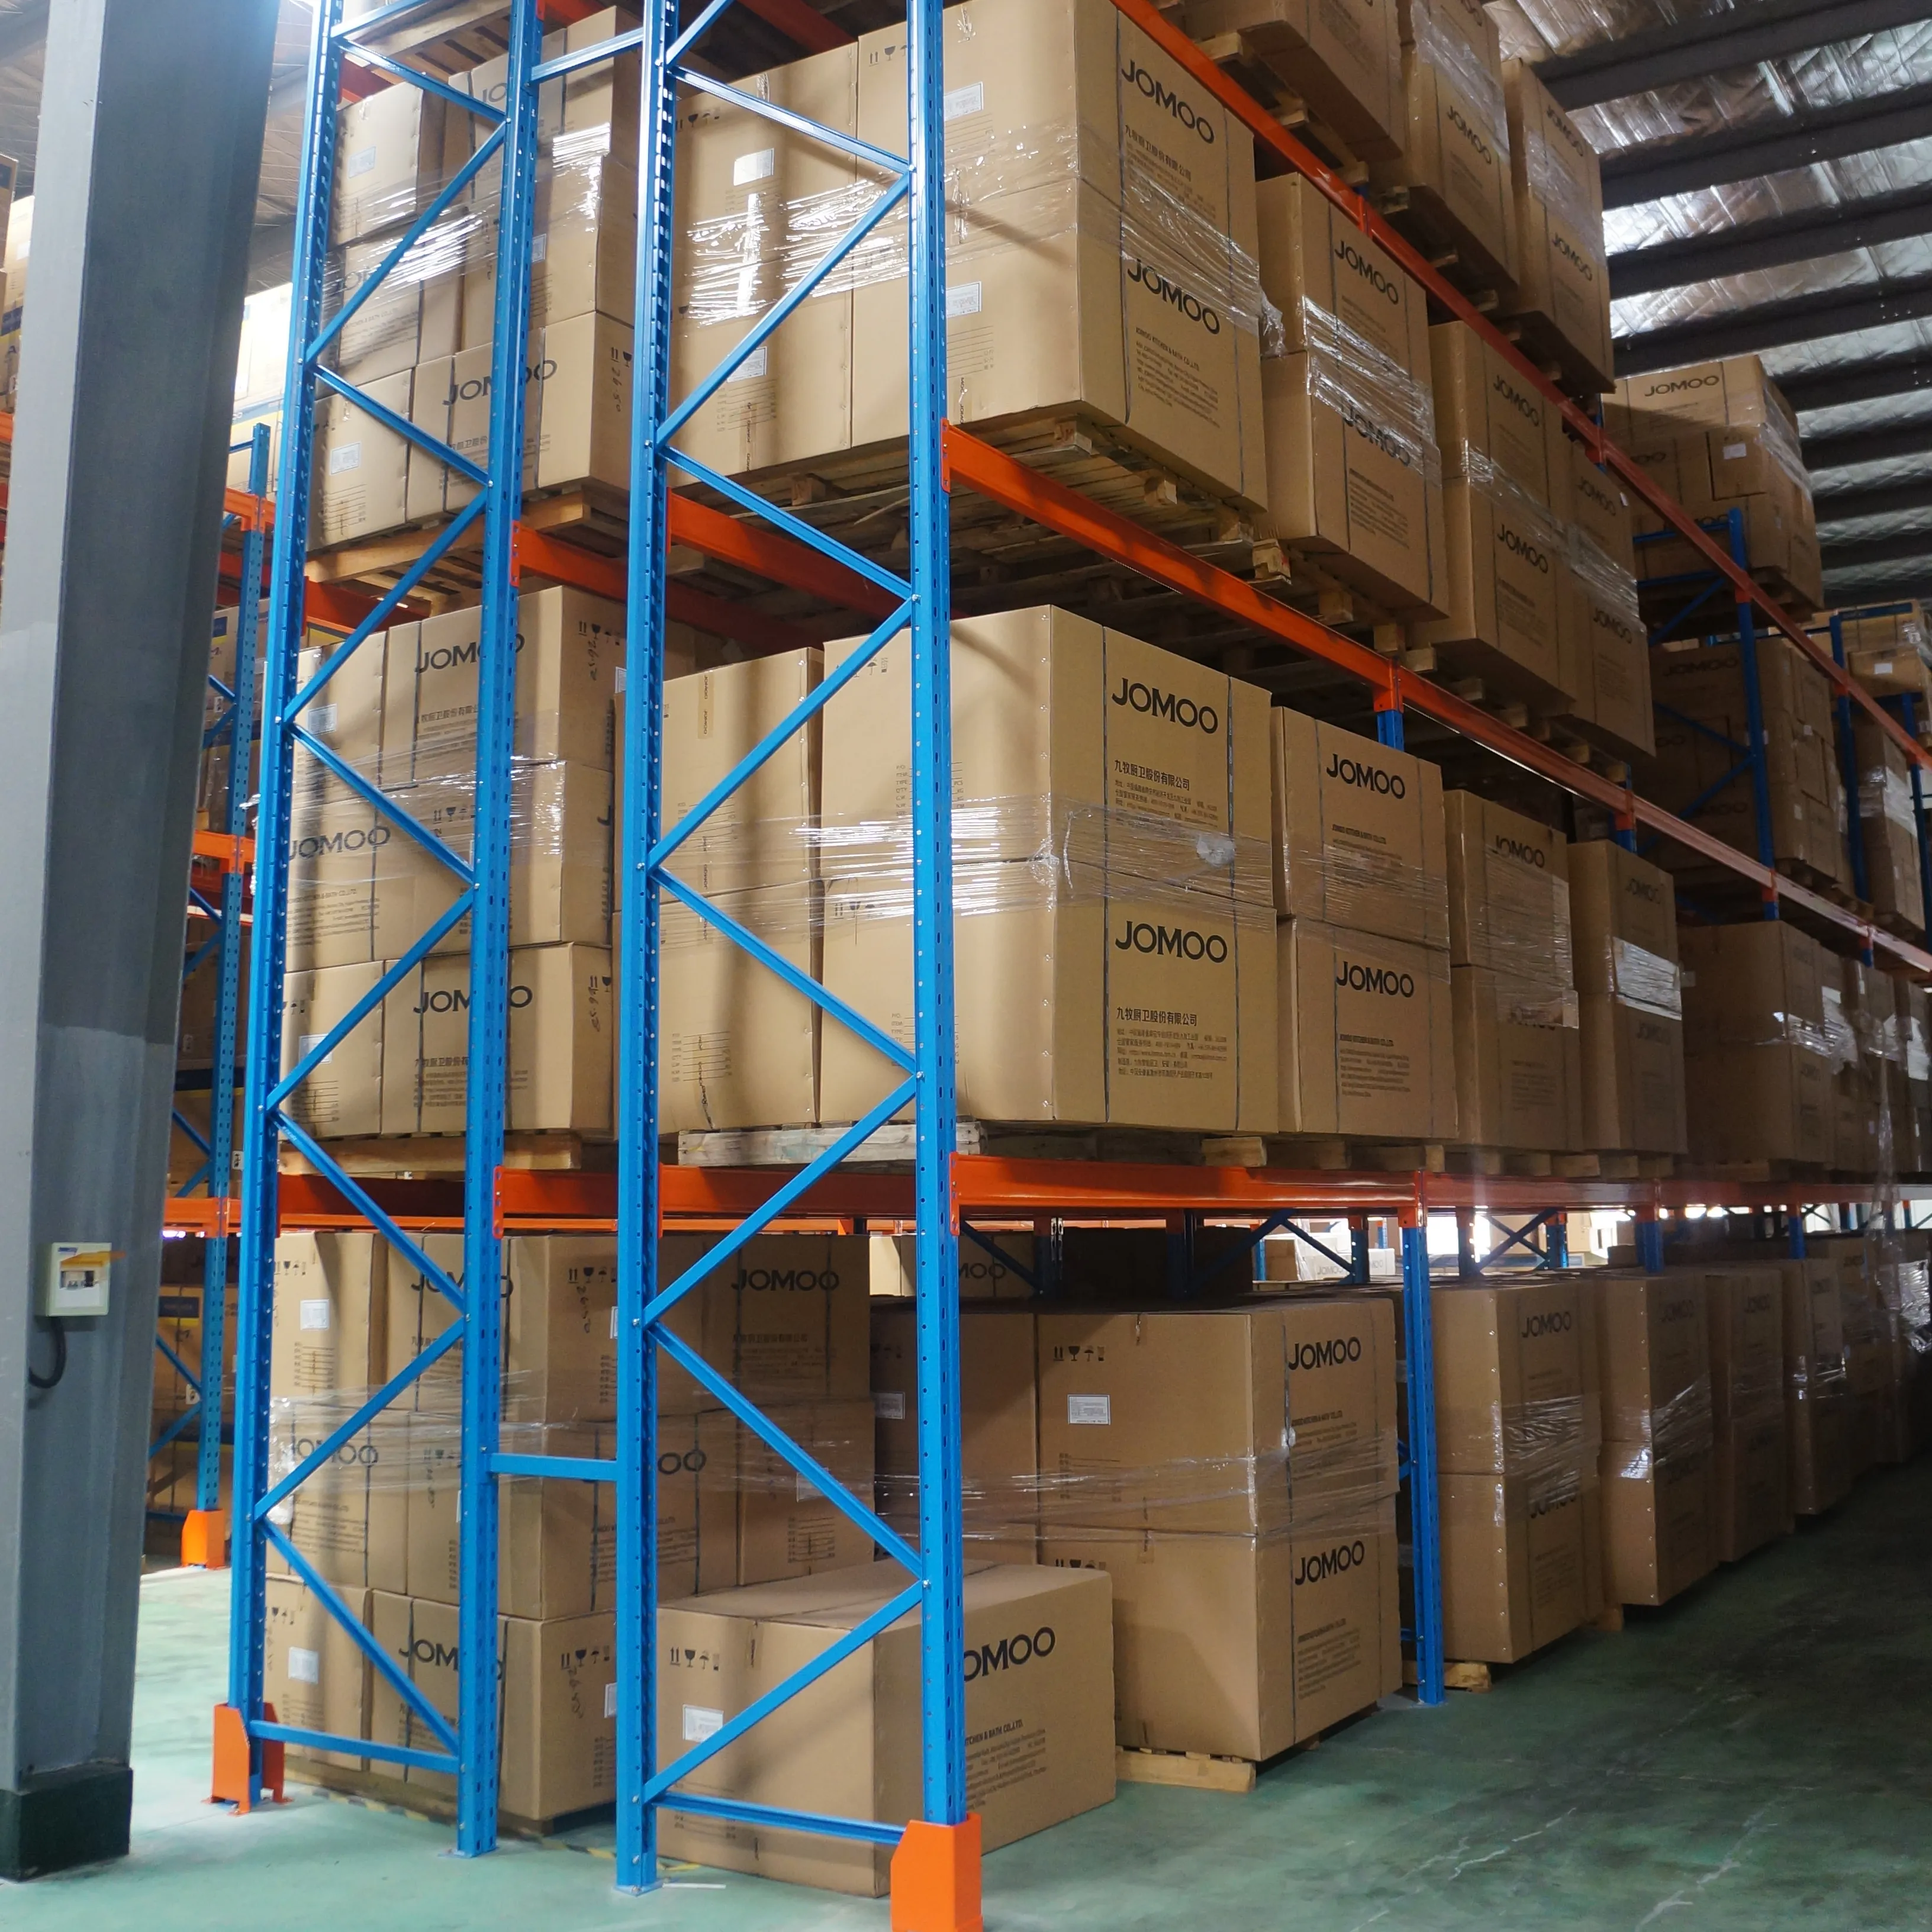 China Hersteller Heavy Duty Industrial Stacking Stahl regal Lager regal für Factory Warehouse Stacking Racks & Regale